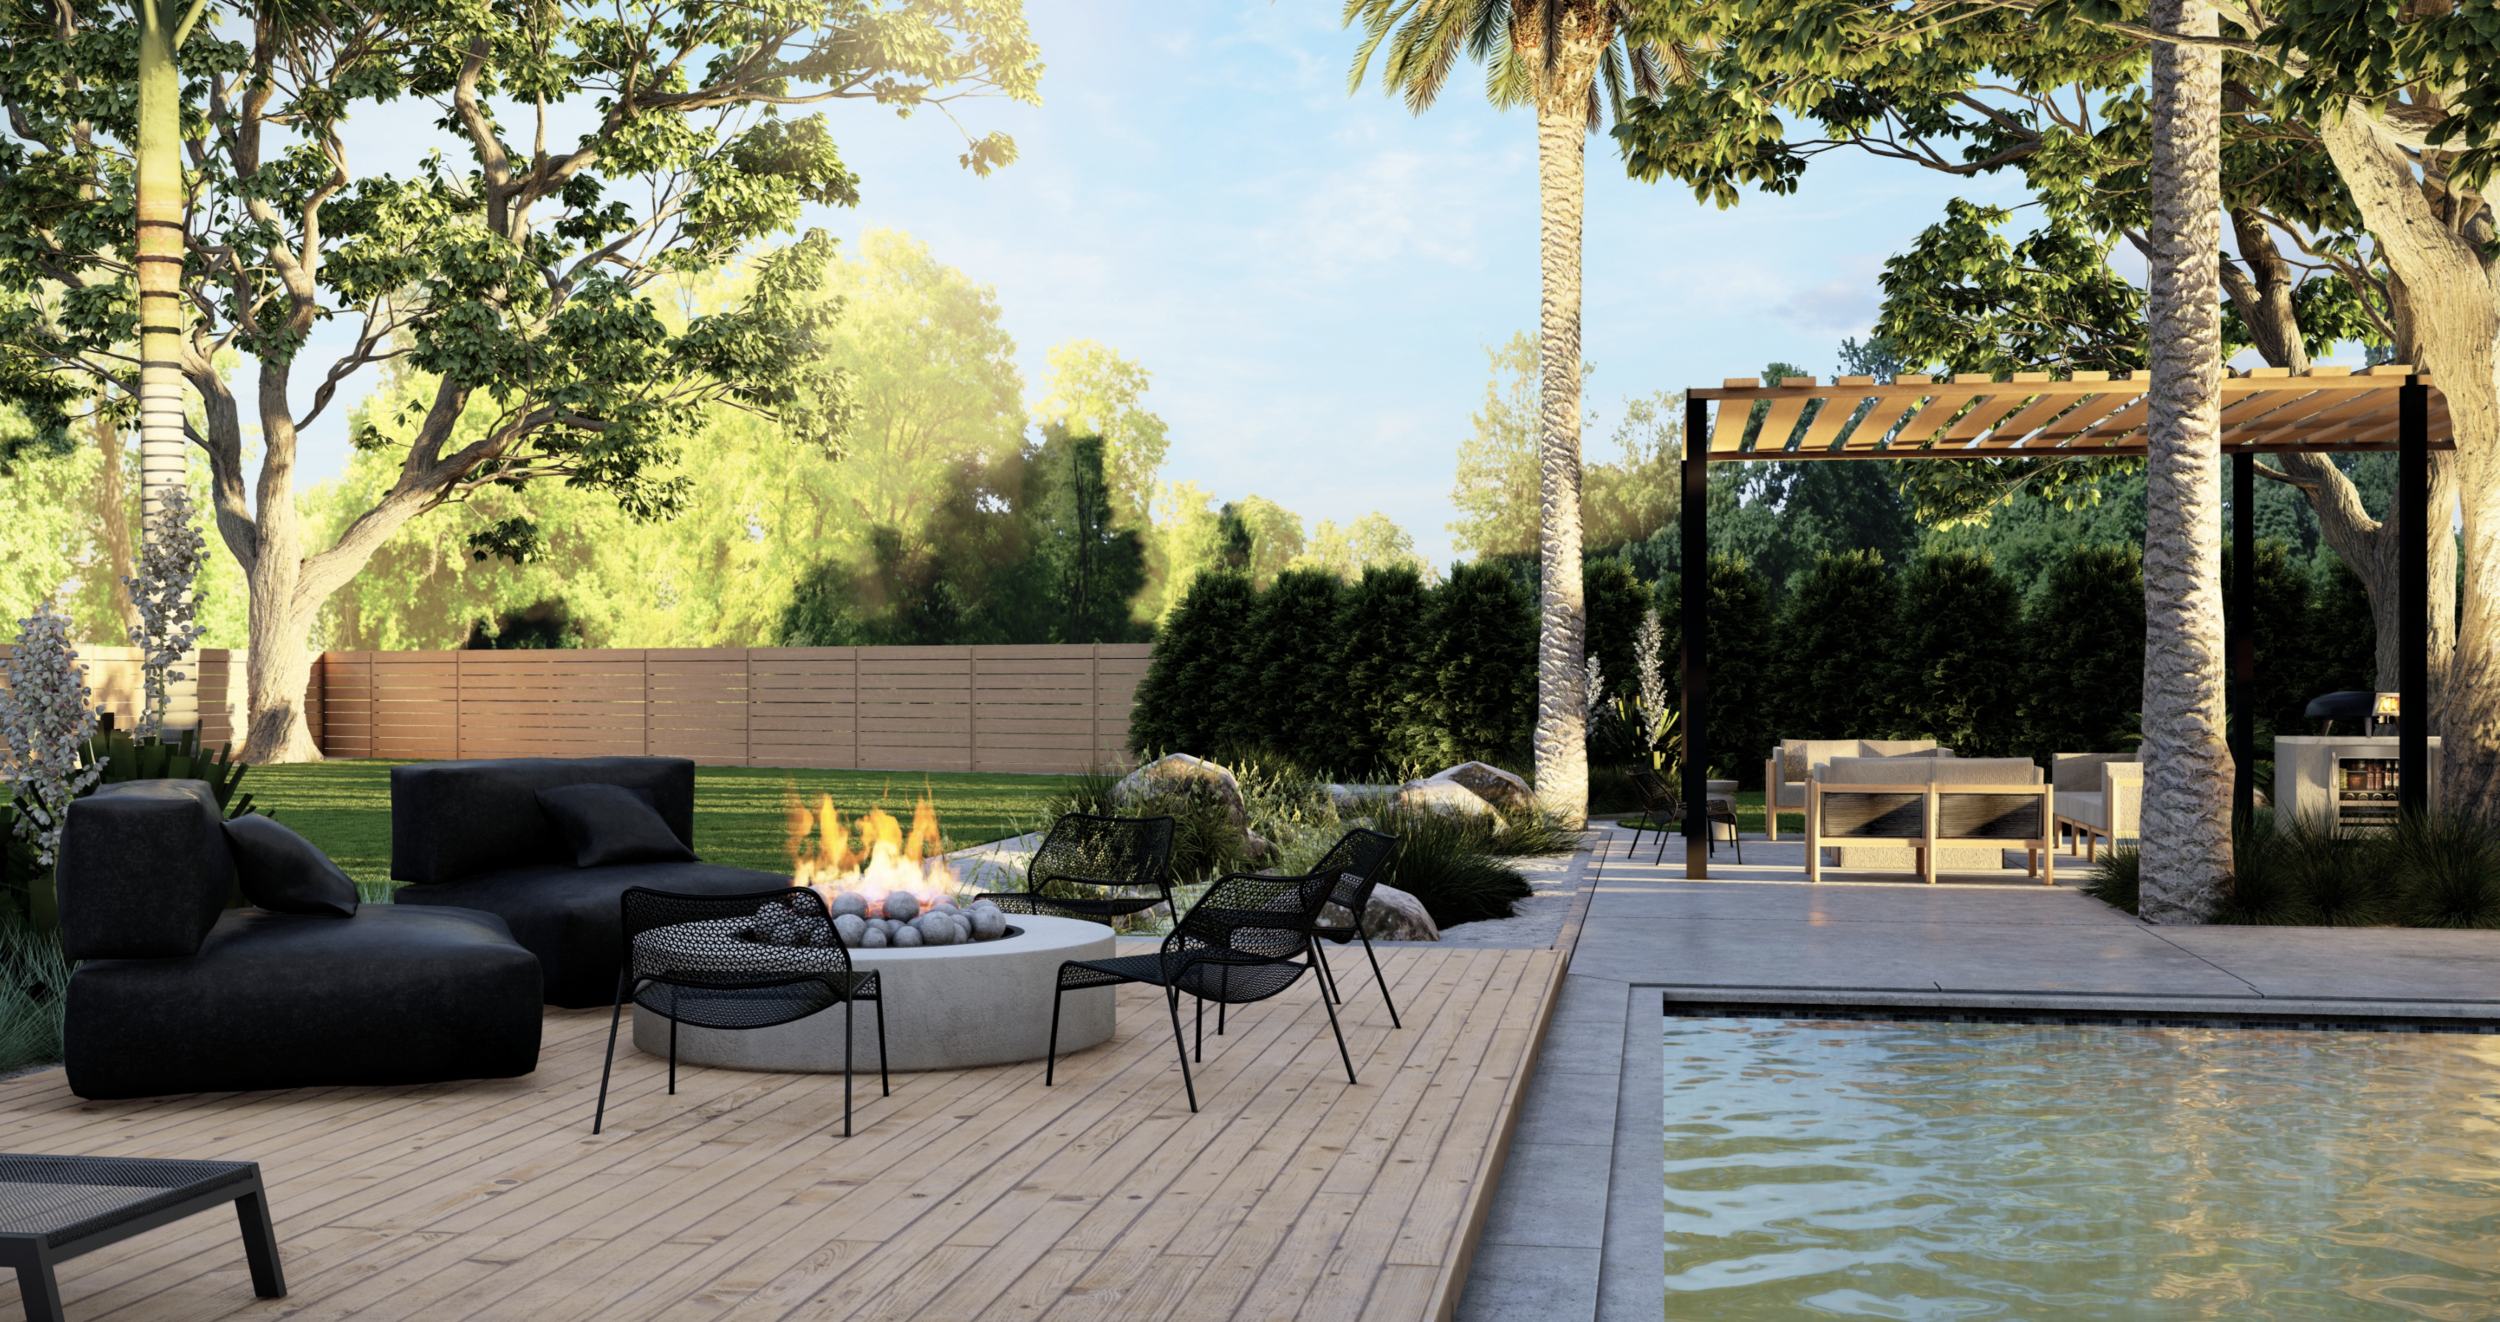 Outdoor fire pit with seating near a pergola covered outdoor kitchen and lounge area in California back yard design